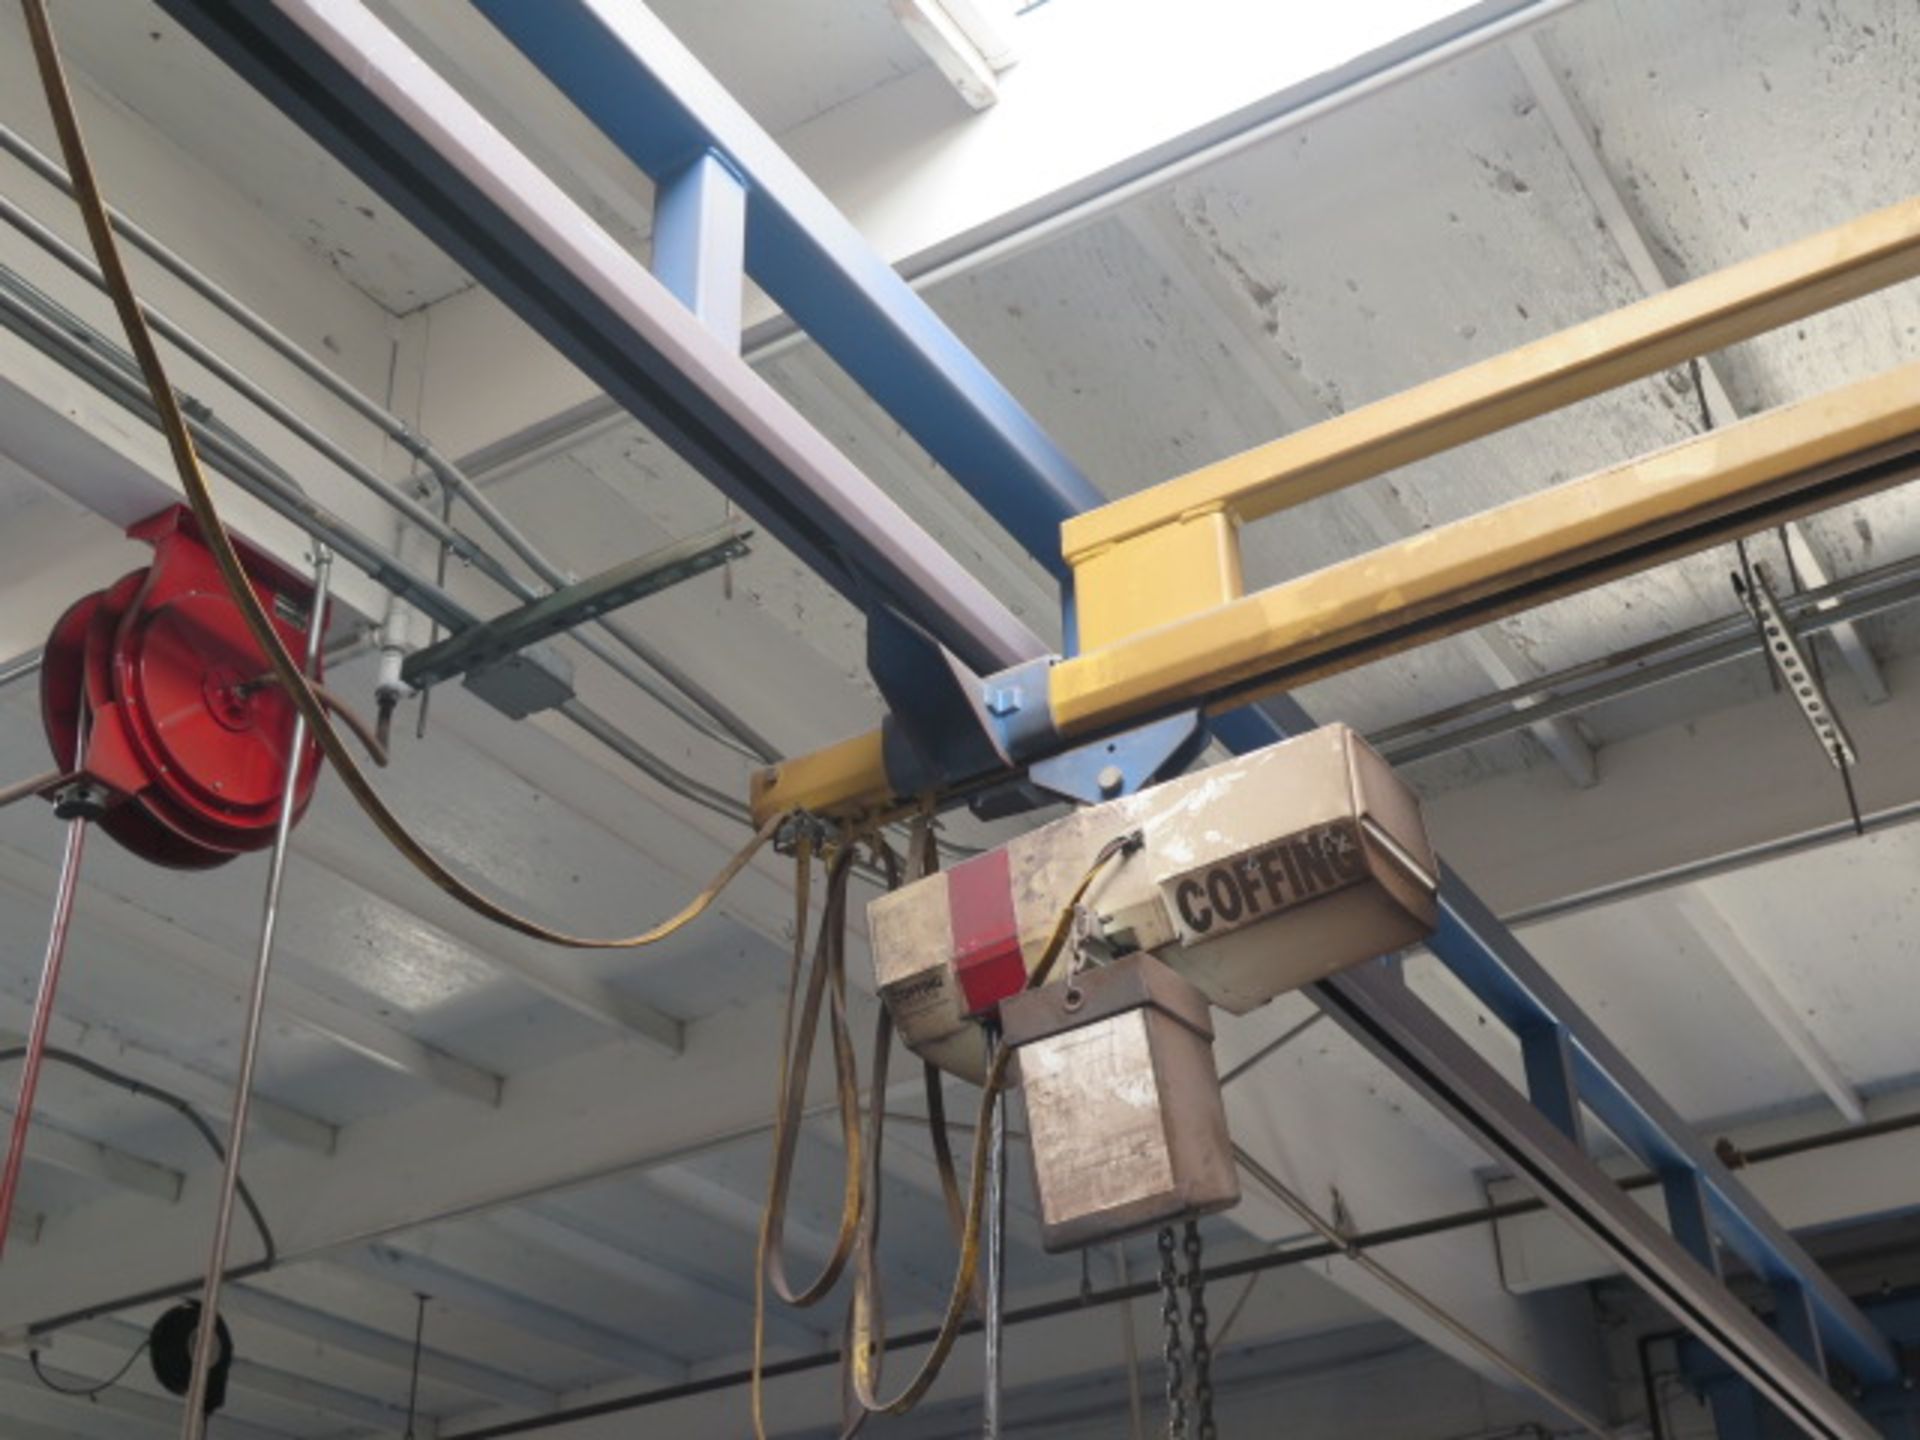 Gorbel 1 Ton 4-Post Gantry System w/ Coffing 1 Ton Electric Hoist, Approx 22’ Span x 33’ - Image 4 of 9